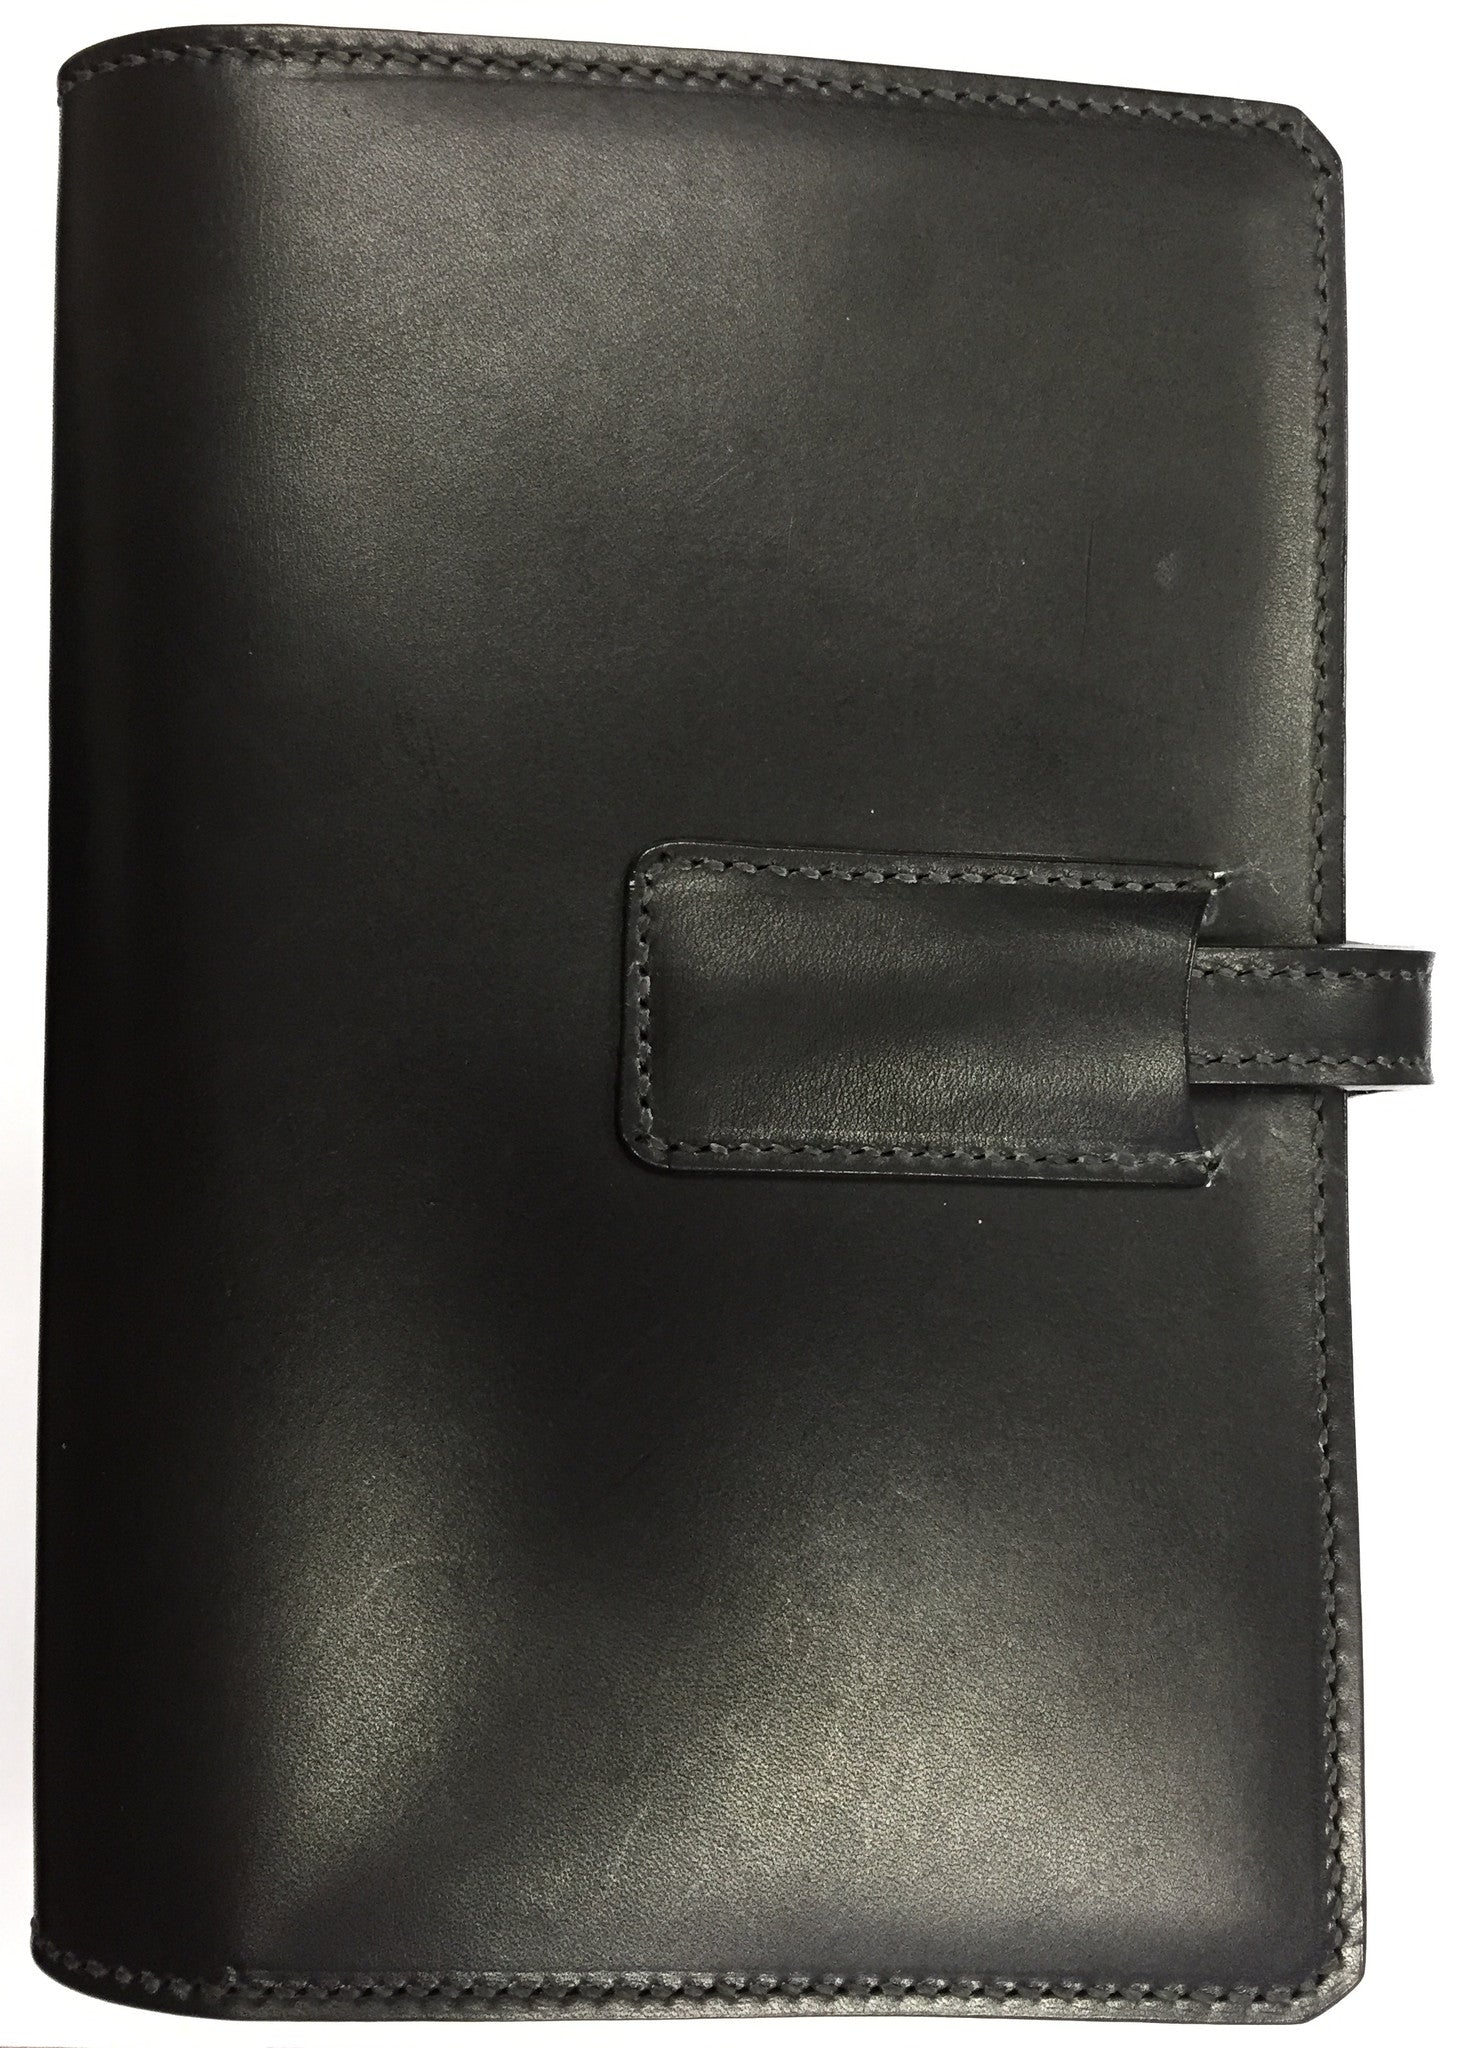 Day Planner w-Tab Closure - The Tack Shop of Lexington - 1